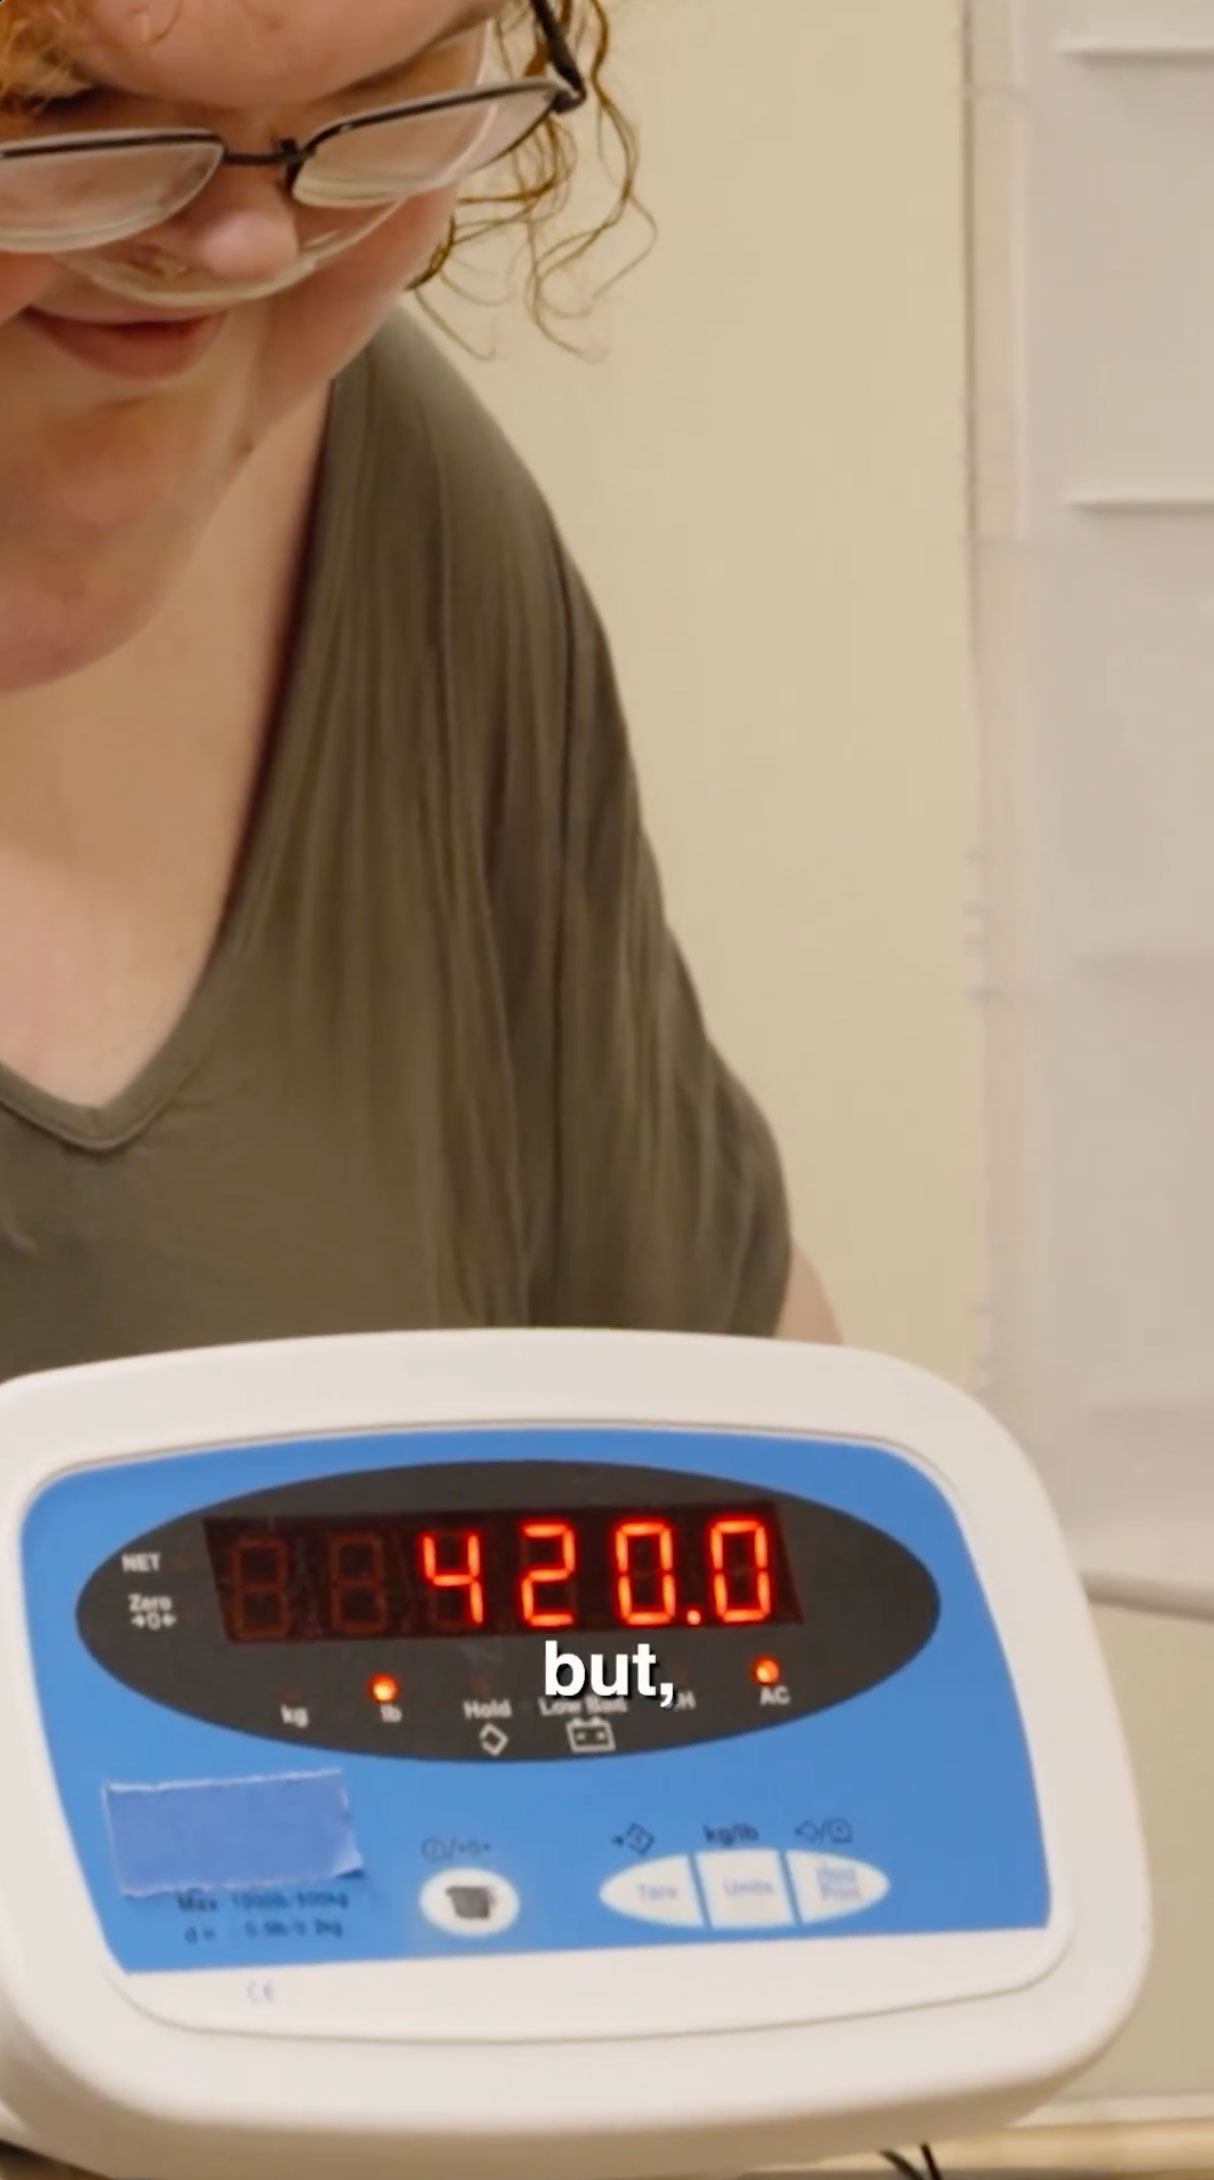 Tammy looked at the number with pride as she stood on the scale